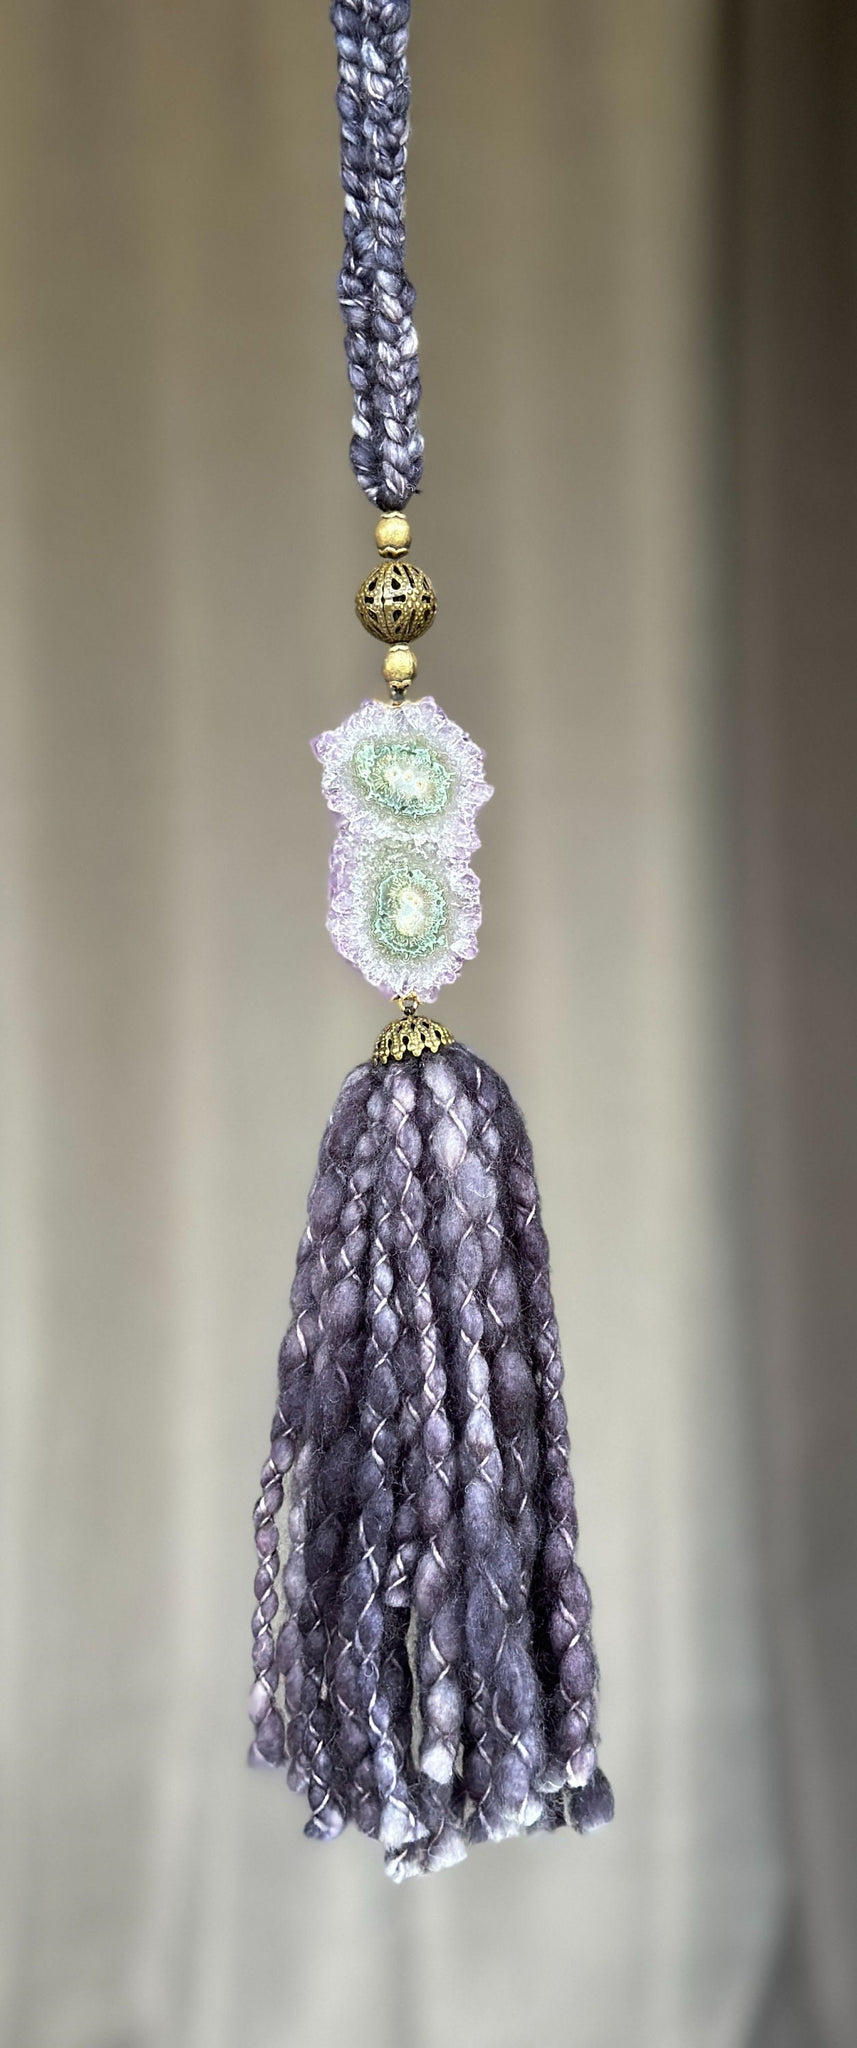 Curtains Tie Back with Amethyst Crystal and Merino Wool Tassels, Garland with Stalactite Stone, window curtains holder, Natural Wall Hanging